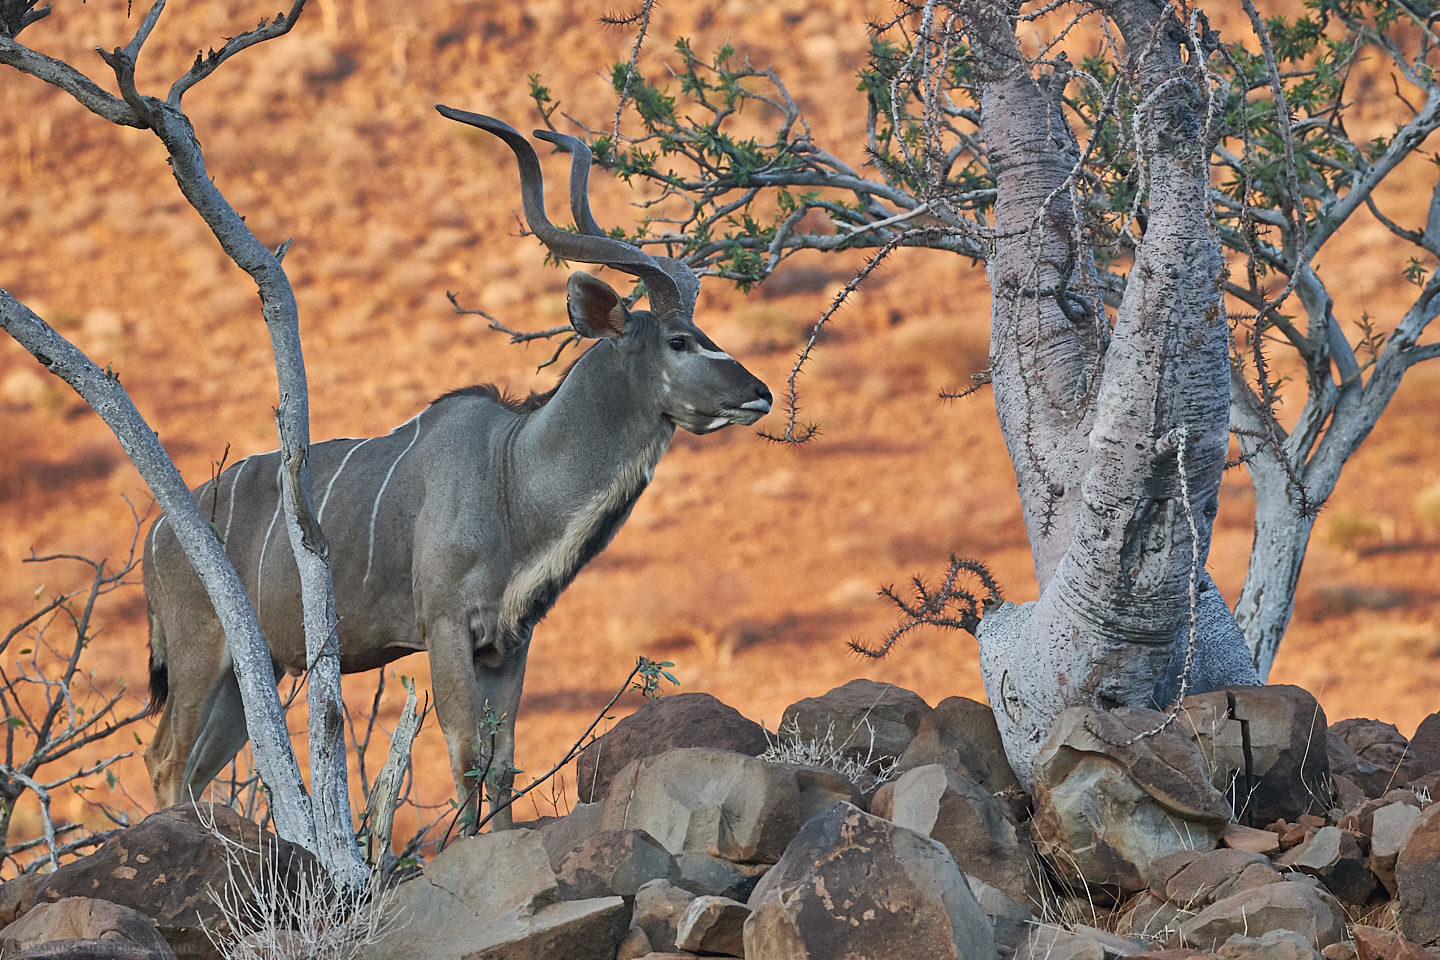 Greater Kudu with Bottle Tree